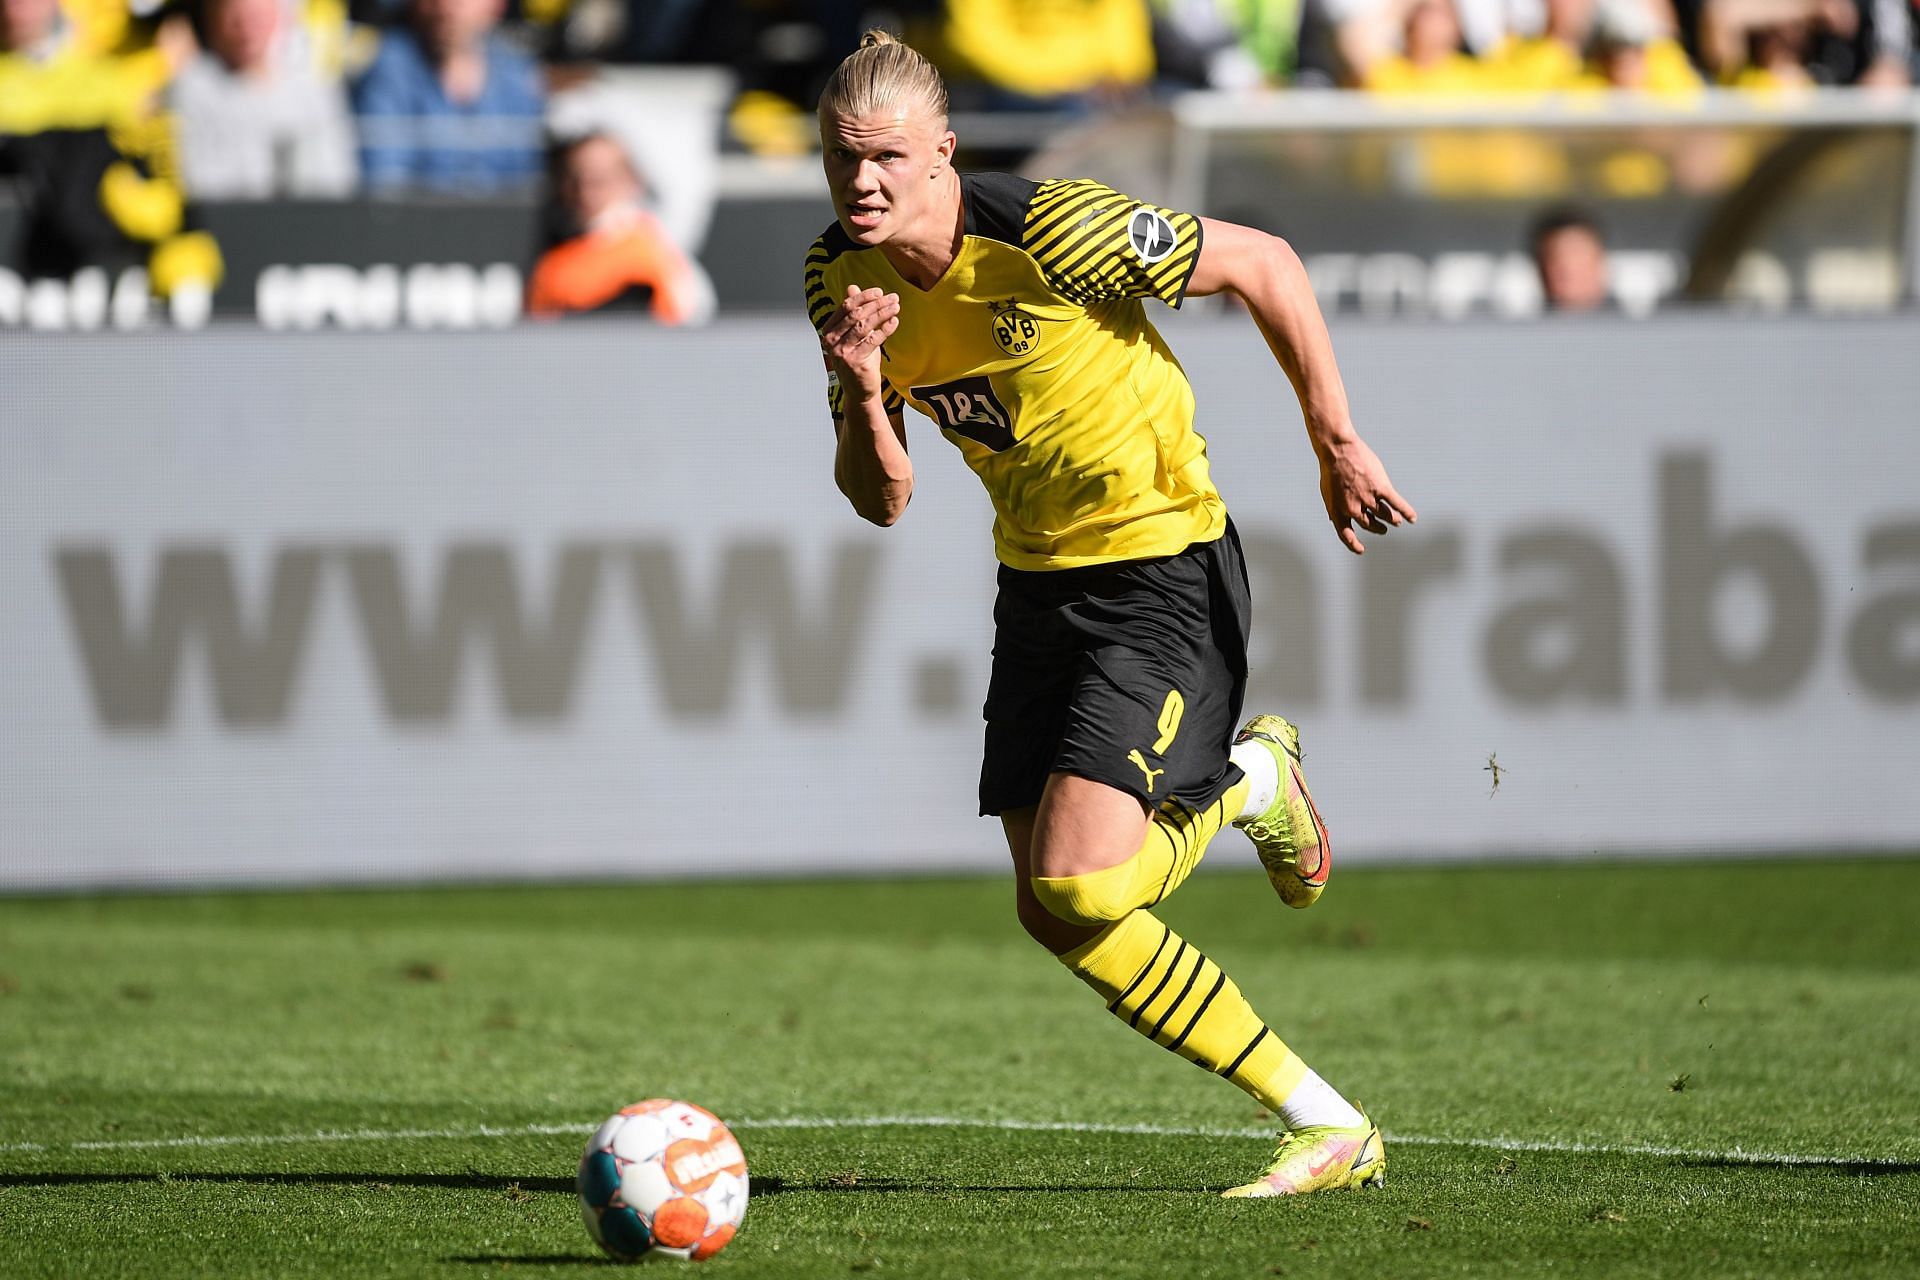 Erling Haaland has been in red-hot form since joining Borussia Dortmund.